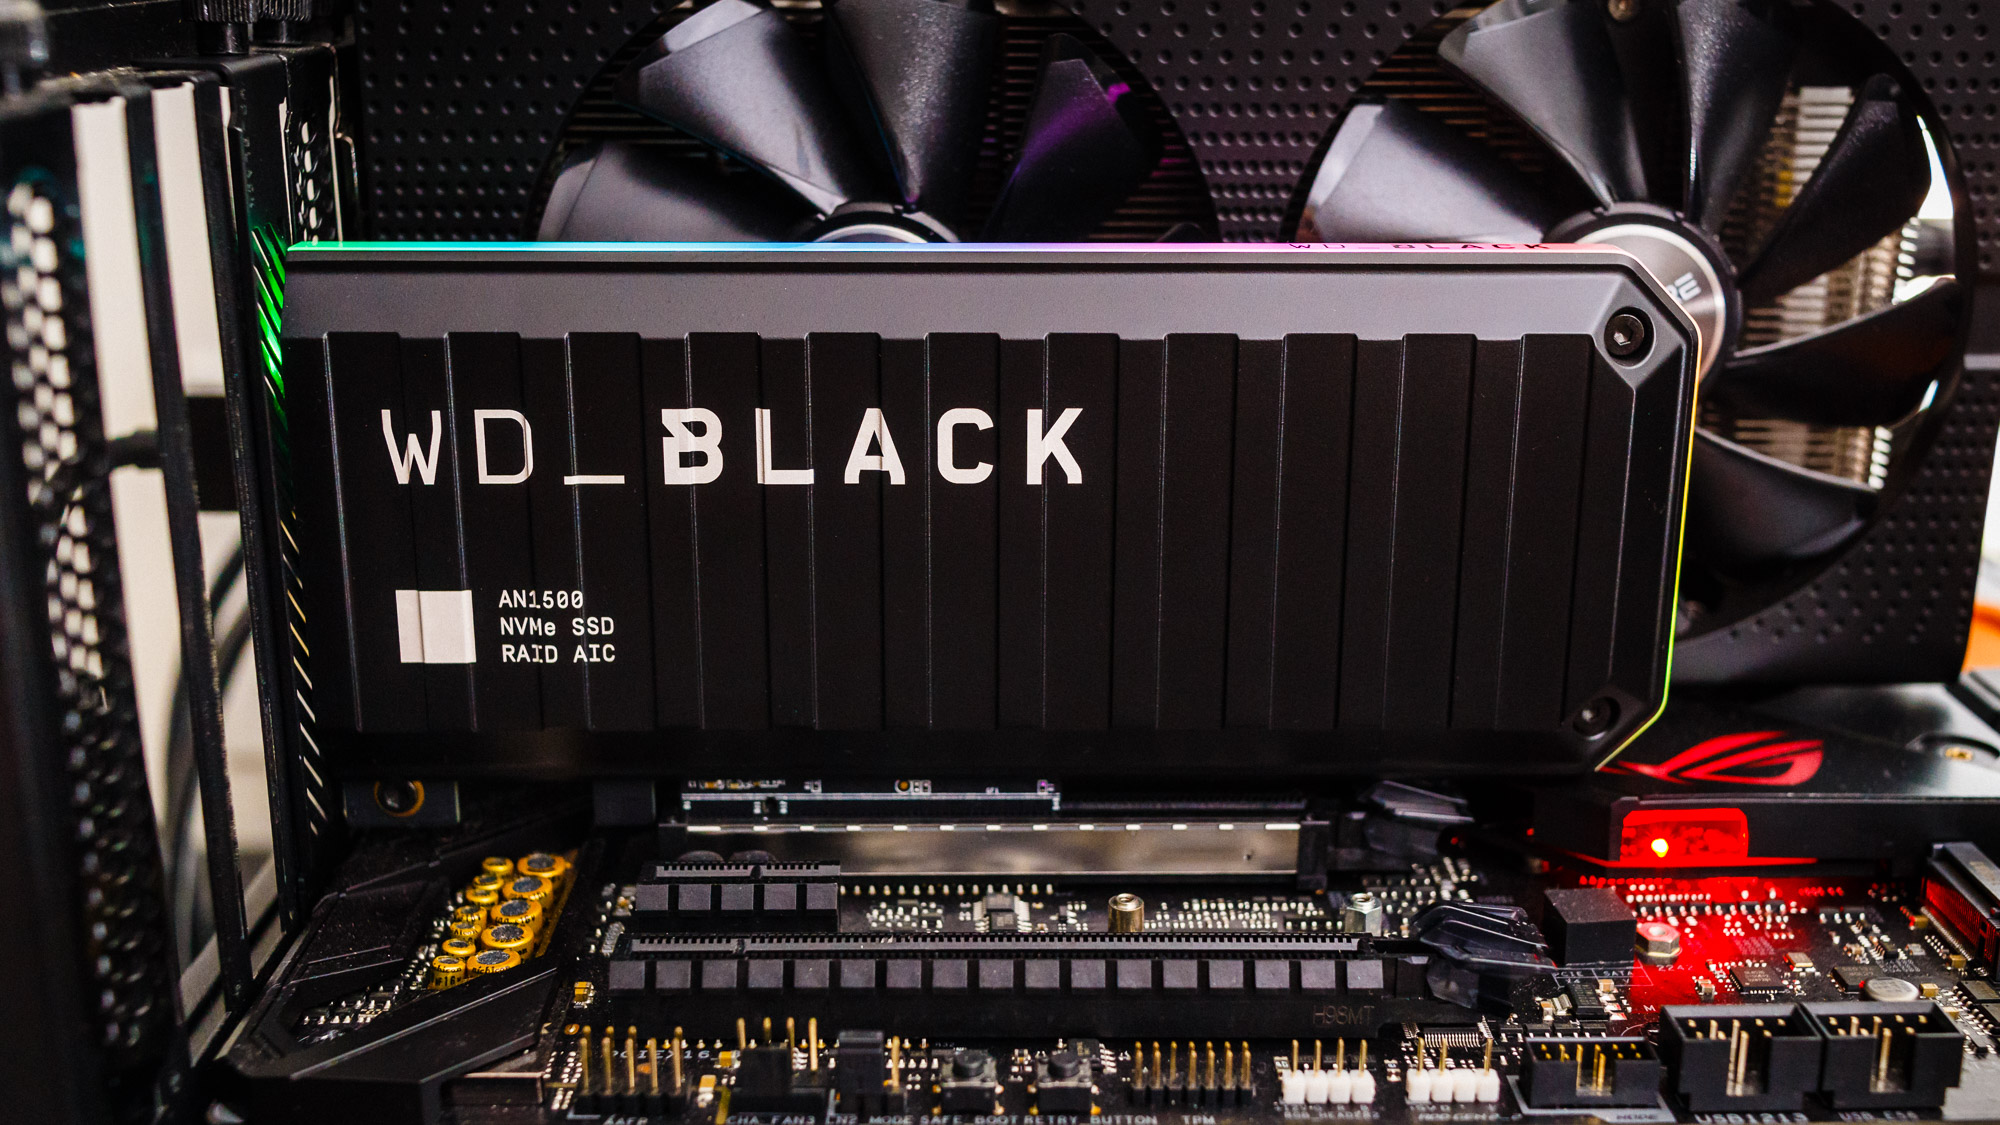 Wd Black An1500 Nvme Ssd Raid Aic Review Built For Rgb Addicts Who Need Speed Tom S Hardware